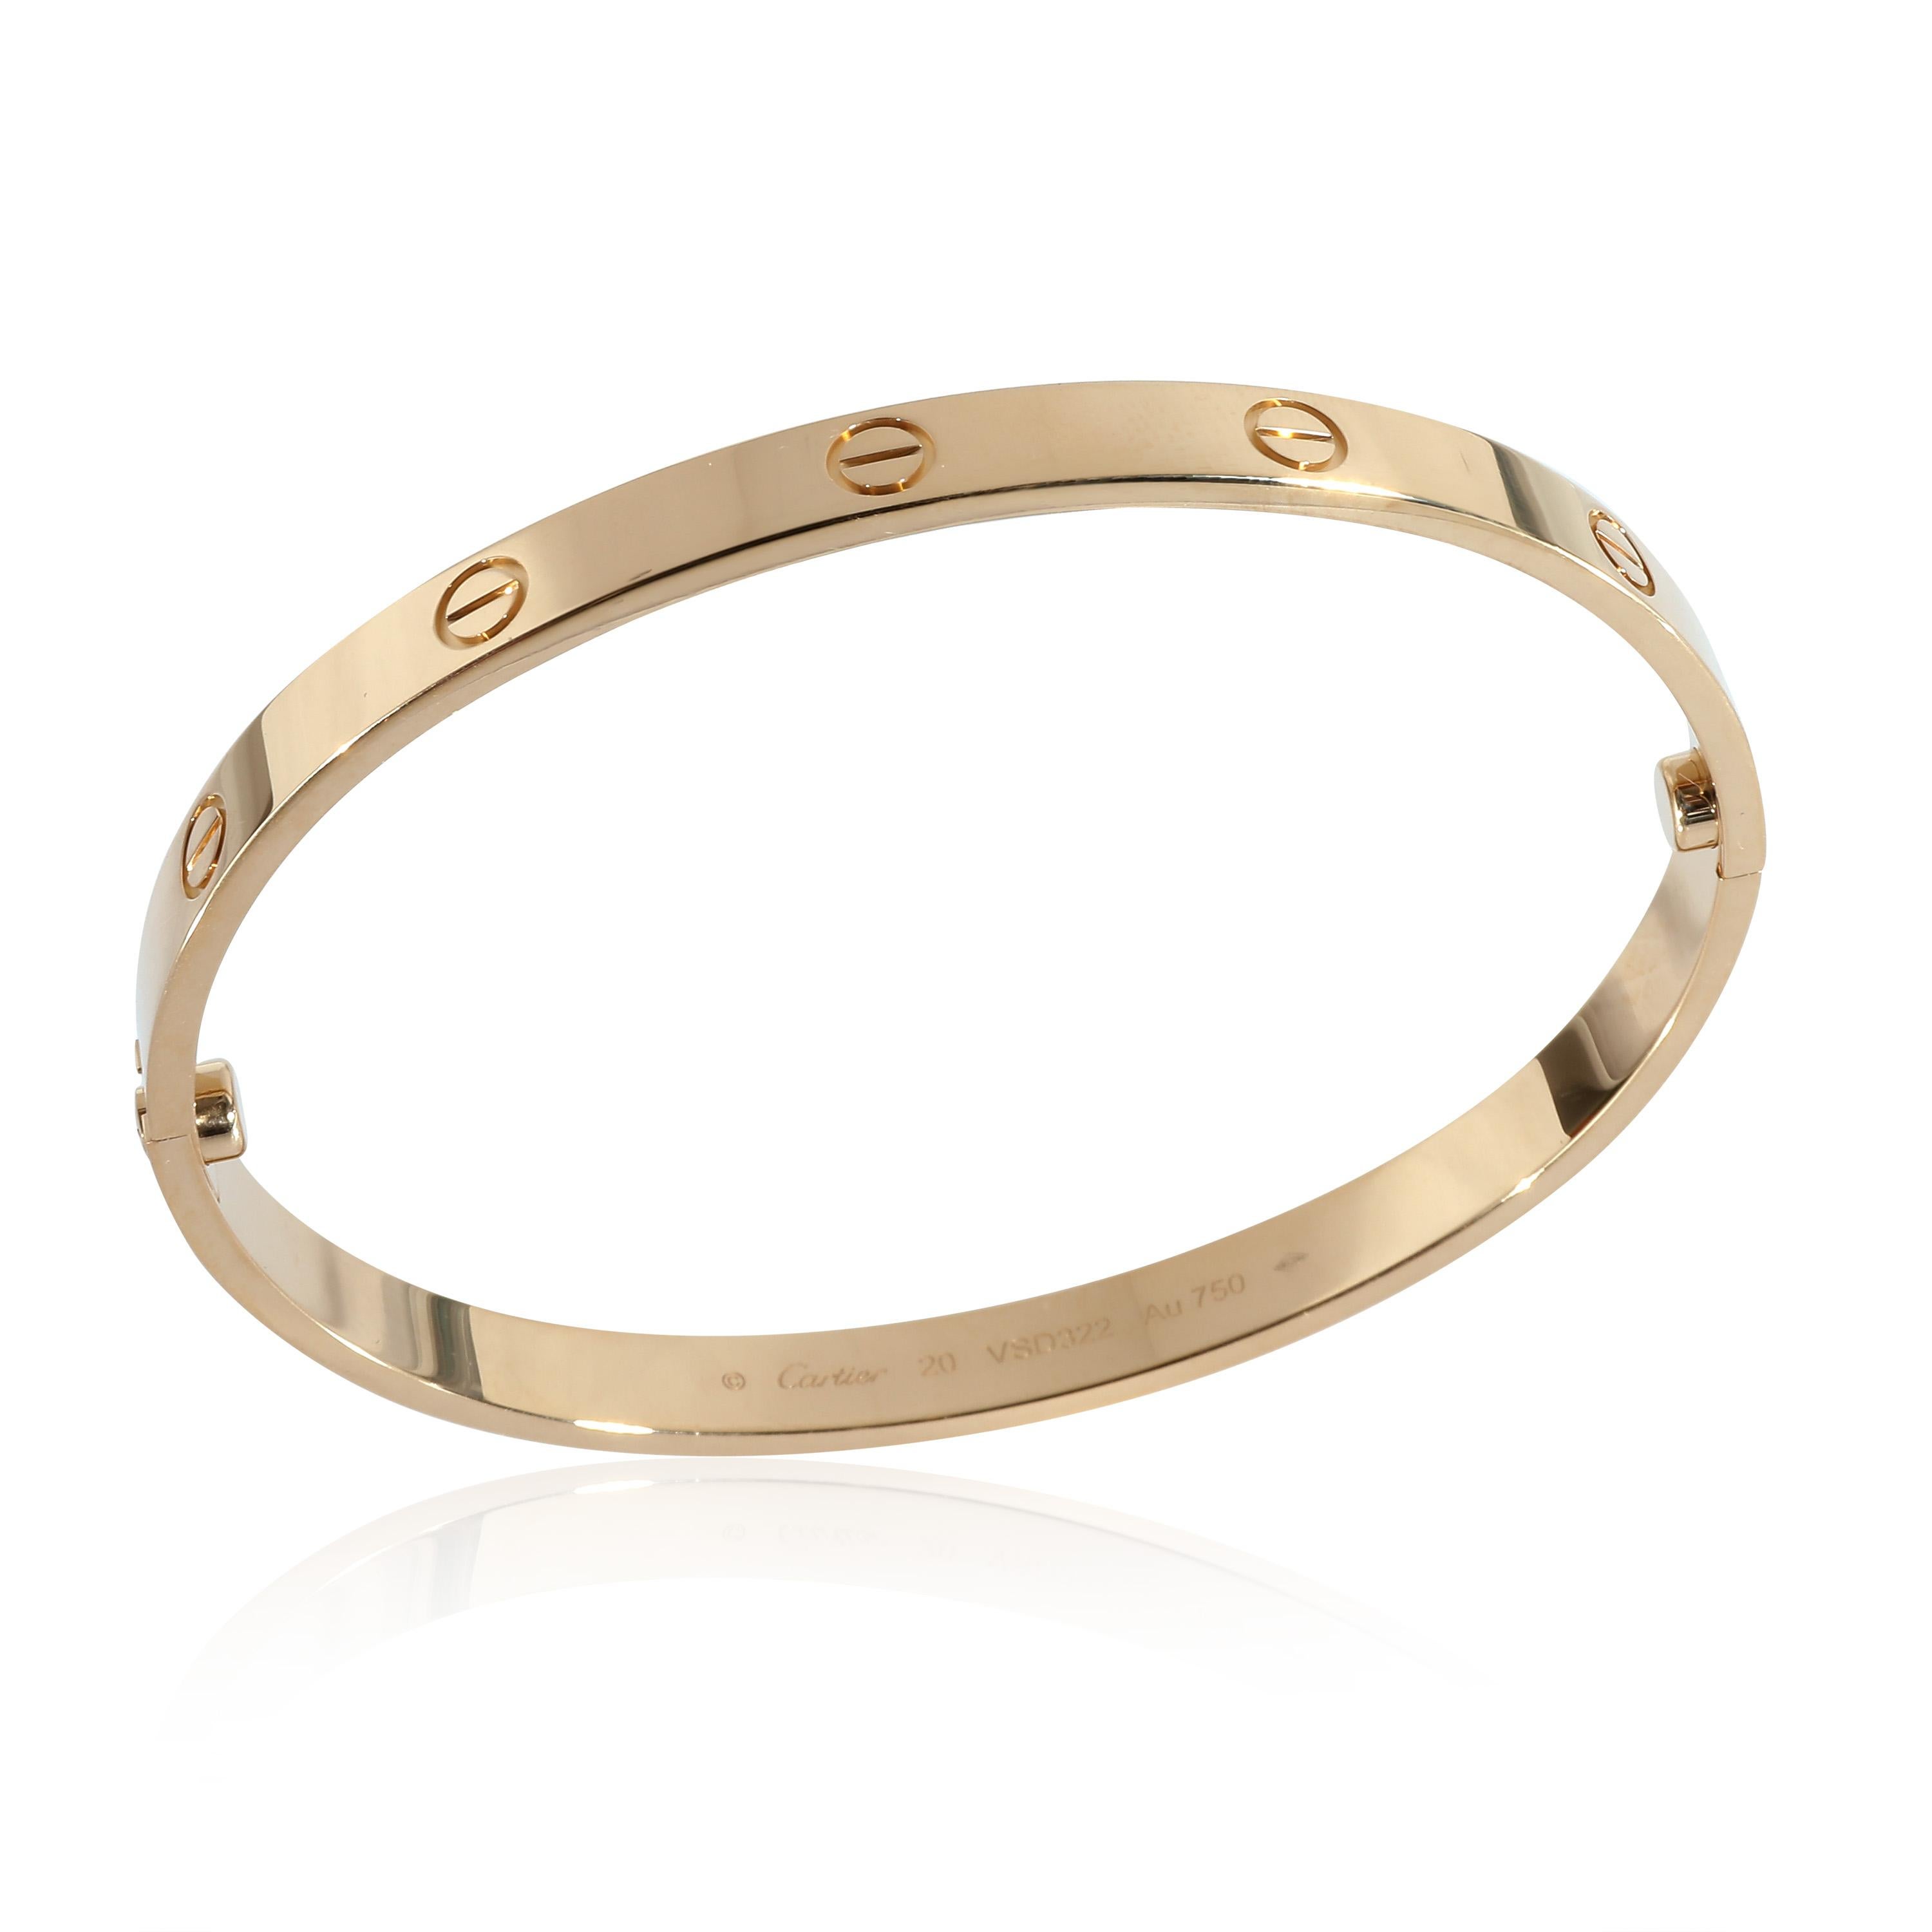 Cartier Love Bracelet (Yellow Gold)

PRIMARY DETAILS
SKU: 136251
Listing Title: Cartier Love Bracelet (Yellow Gold)
Condition Description: Cartier's Love collection is the epitome of iconic, from the recognizable designs to the history behind the